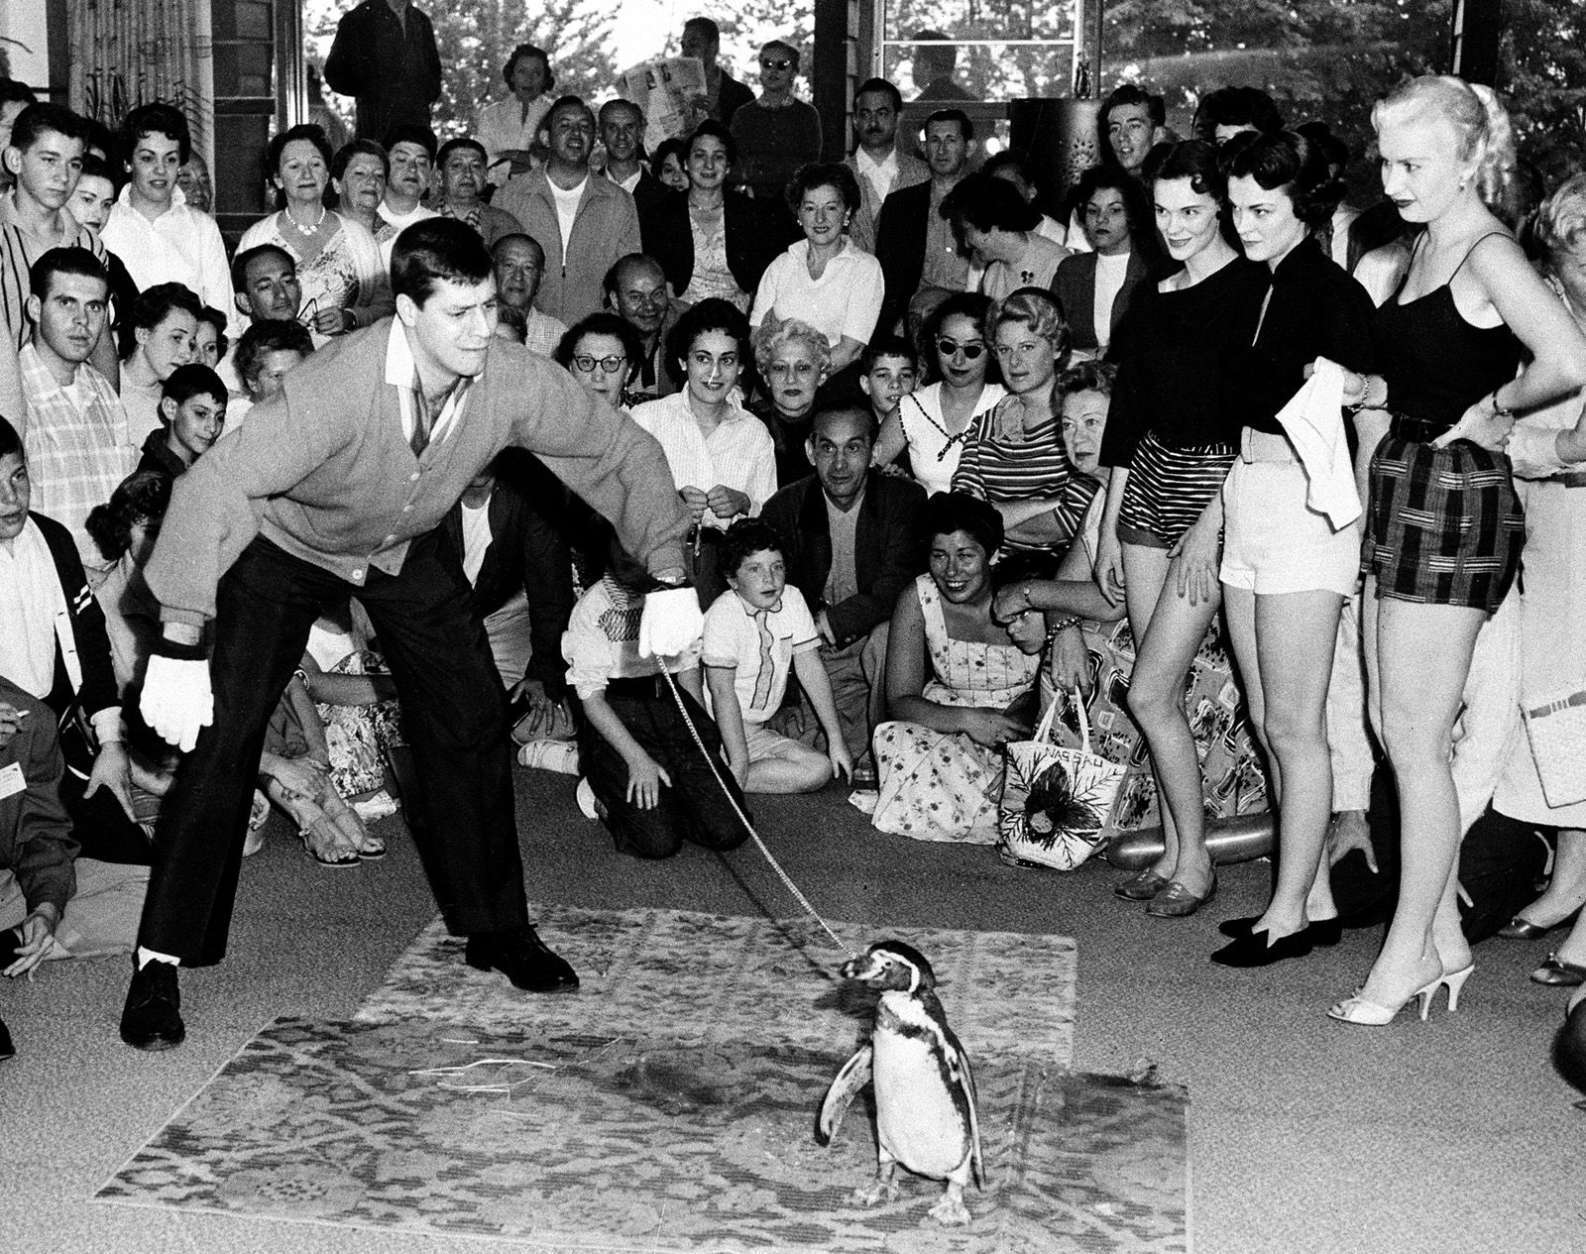 Actor-comedian Jerry Lewis and Wilbur the Penguin perform for an audience at Brown's Hotel in Sheldrake, N.Y., in June 1955.  The three Fed Astaire dance hostesses standing nearby are Laurie Cabot, far right, and the Borrowes twins.  (AP Photo/Irving Desfor)